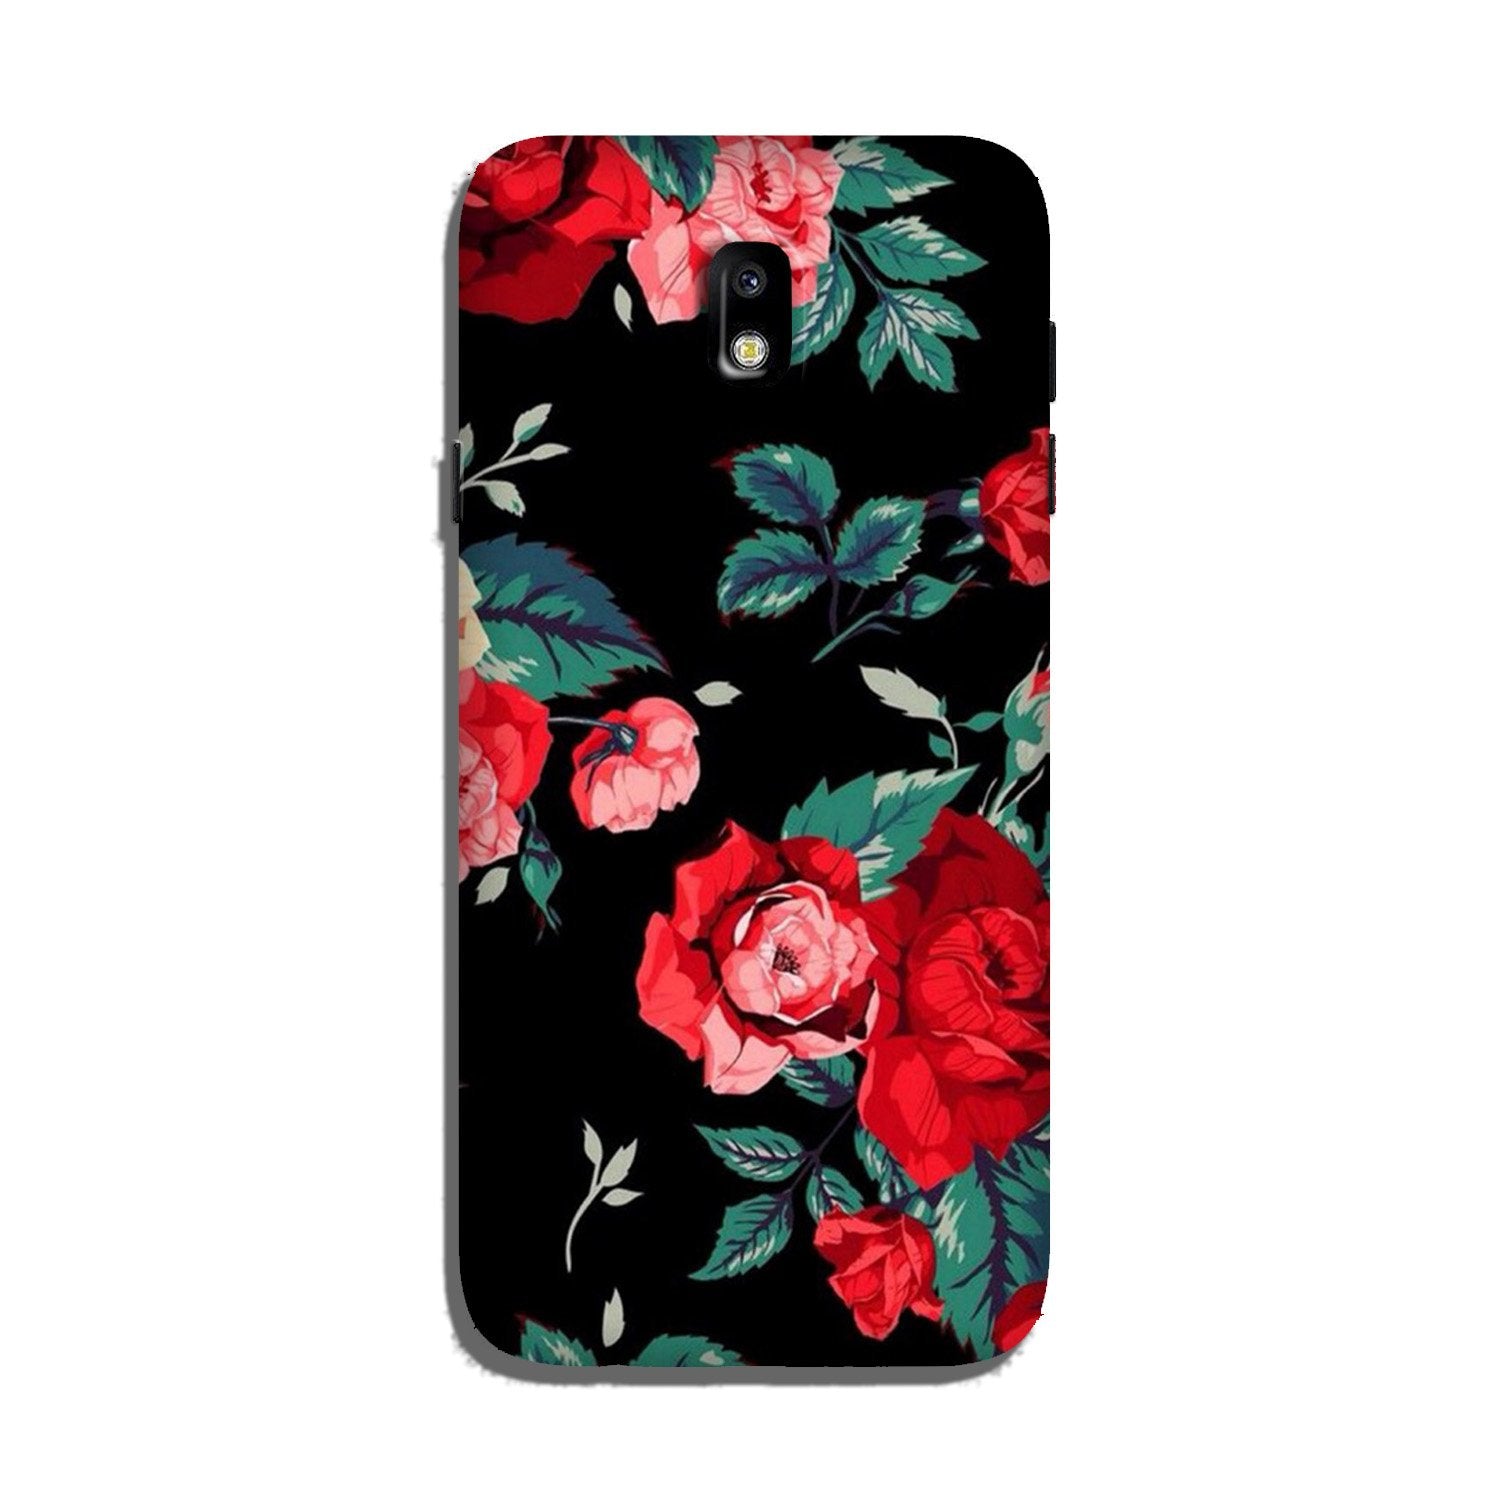 Red Rose2 Case for Galaxy J7 Pro